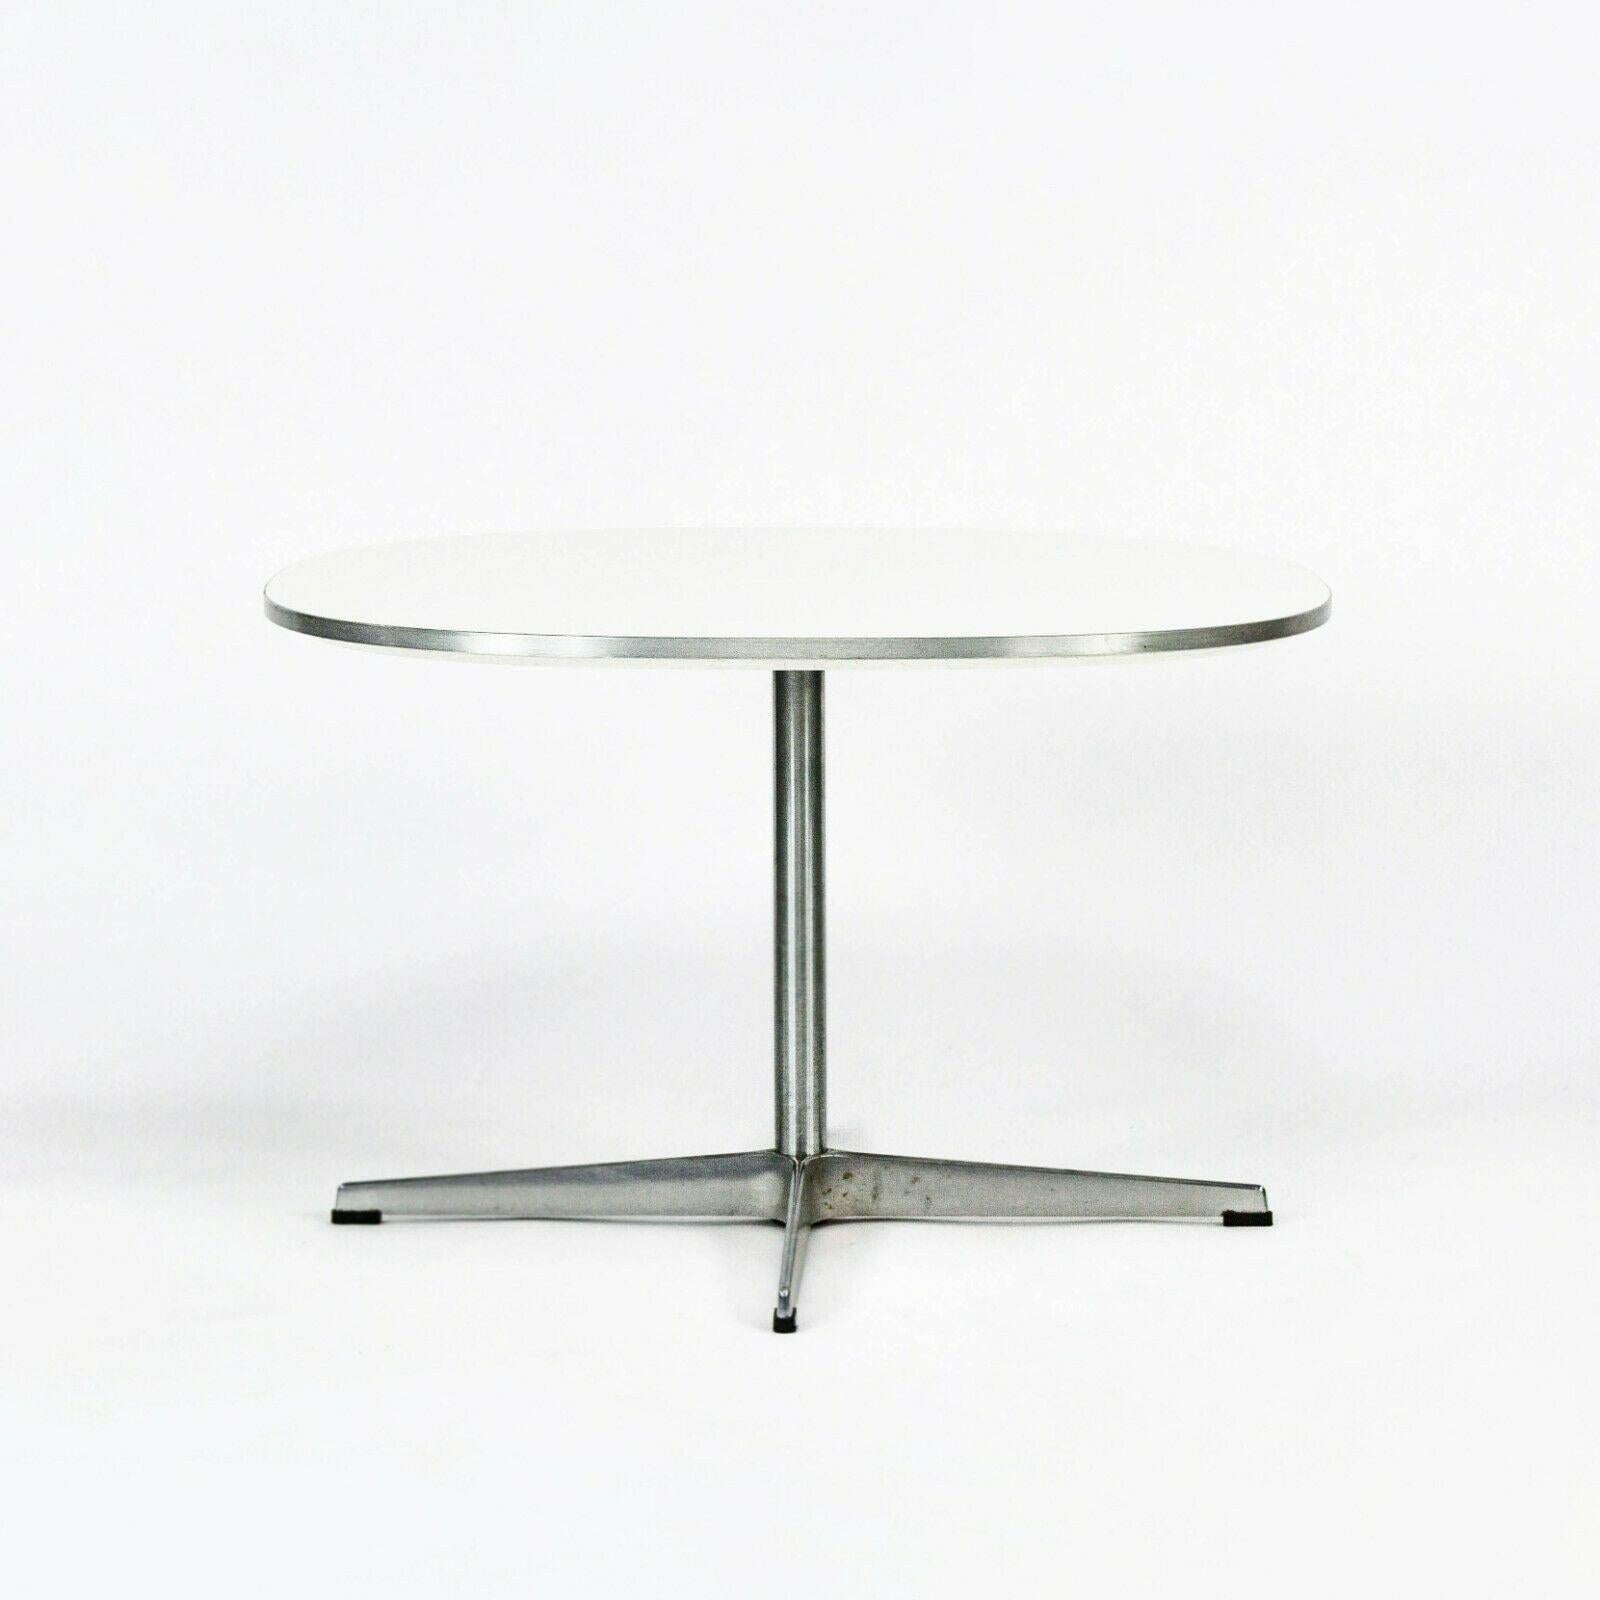 Listed for sale is a Superellipse coffee table (or large end table) by Piet Hein, Arne Jacobsen, and Bruno Mathsson for Fritz Hansen, produced in 2004. This design was originally introduced in 1968 and was part of a collaboration between Hein,